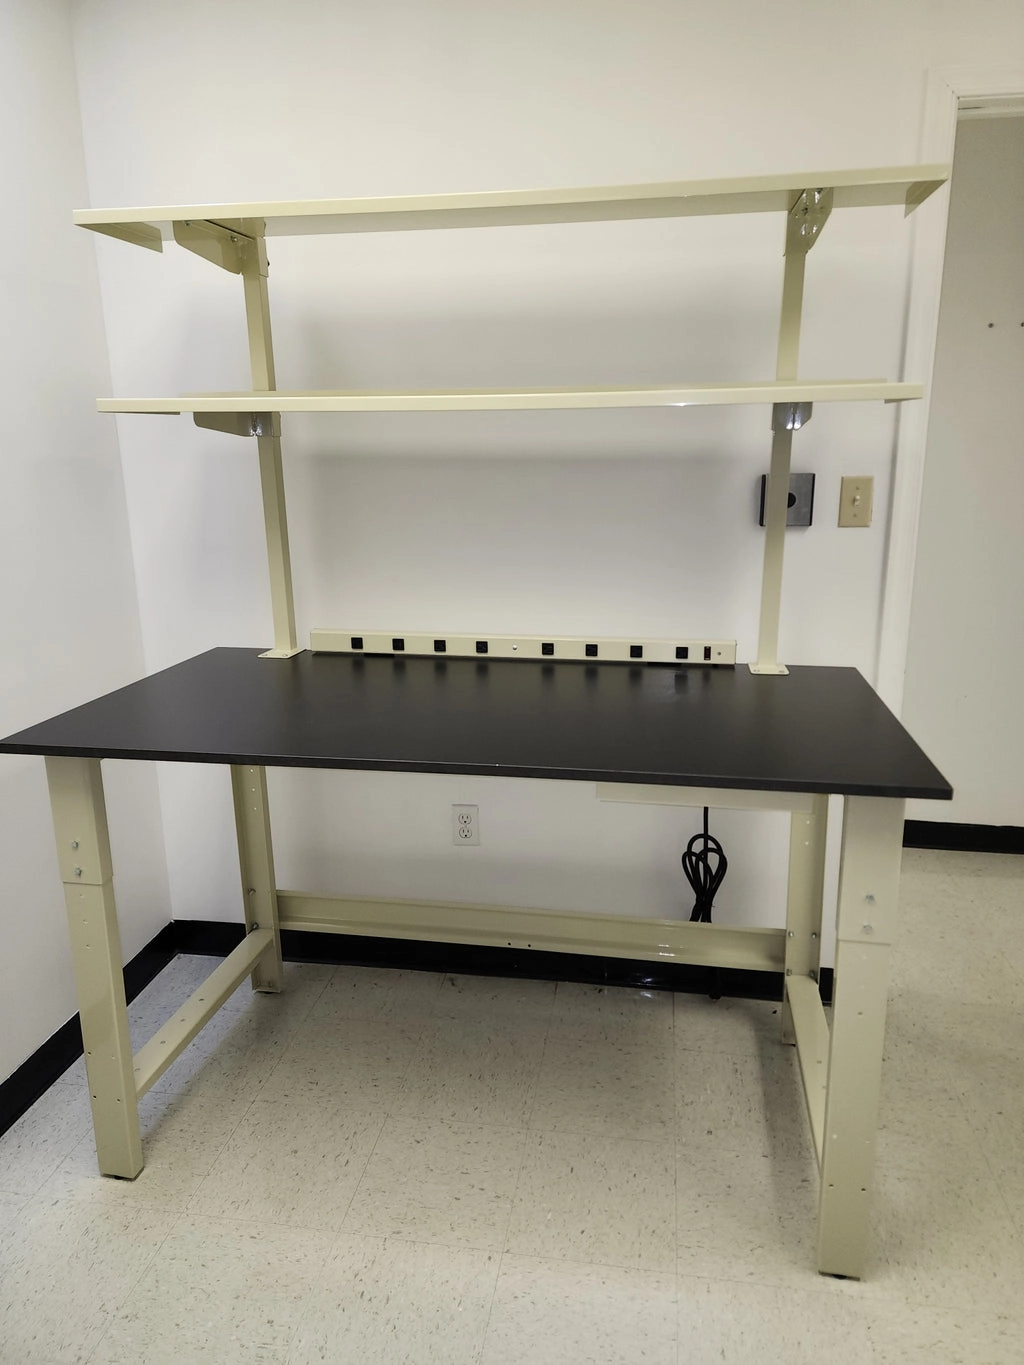 Quick Labs 5 foot light duty Mobile lab bench with phenolic resin countertop, (2) upper shelves, undercounter shelf, power strip, and casters (30"D x 60"L x 36"H)--adjustable height | QMBL3060-PR